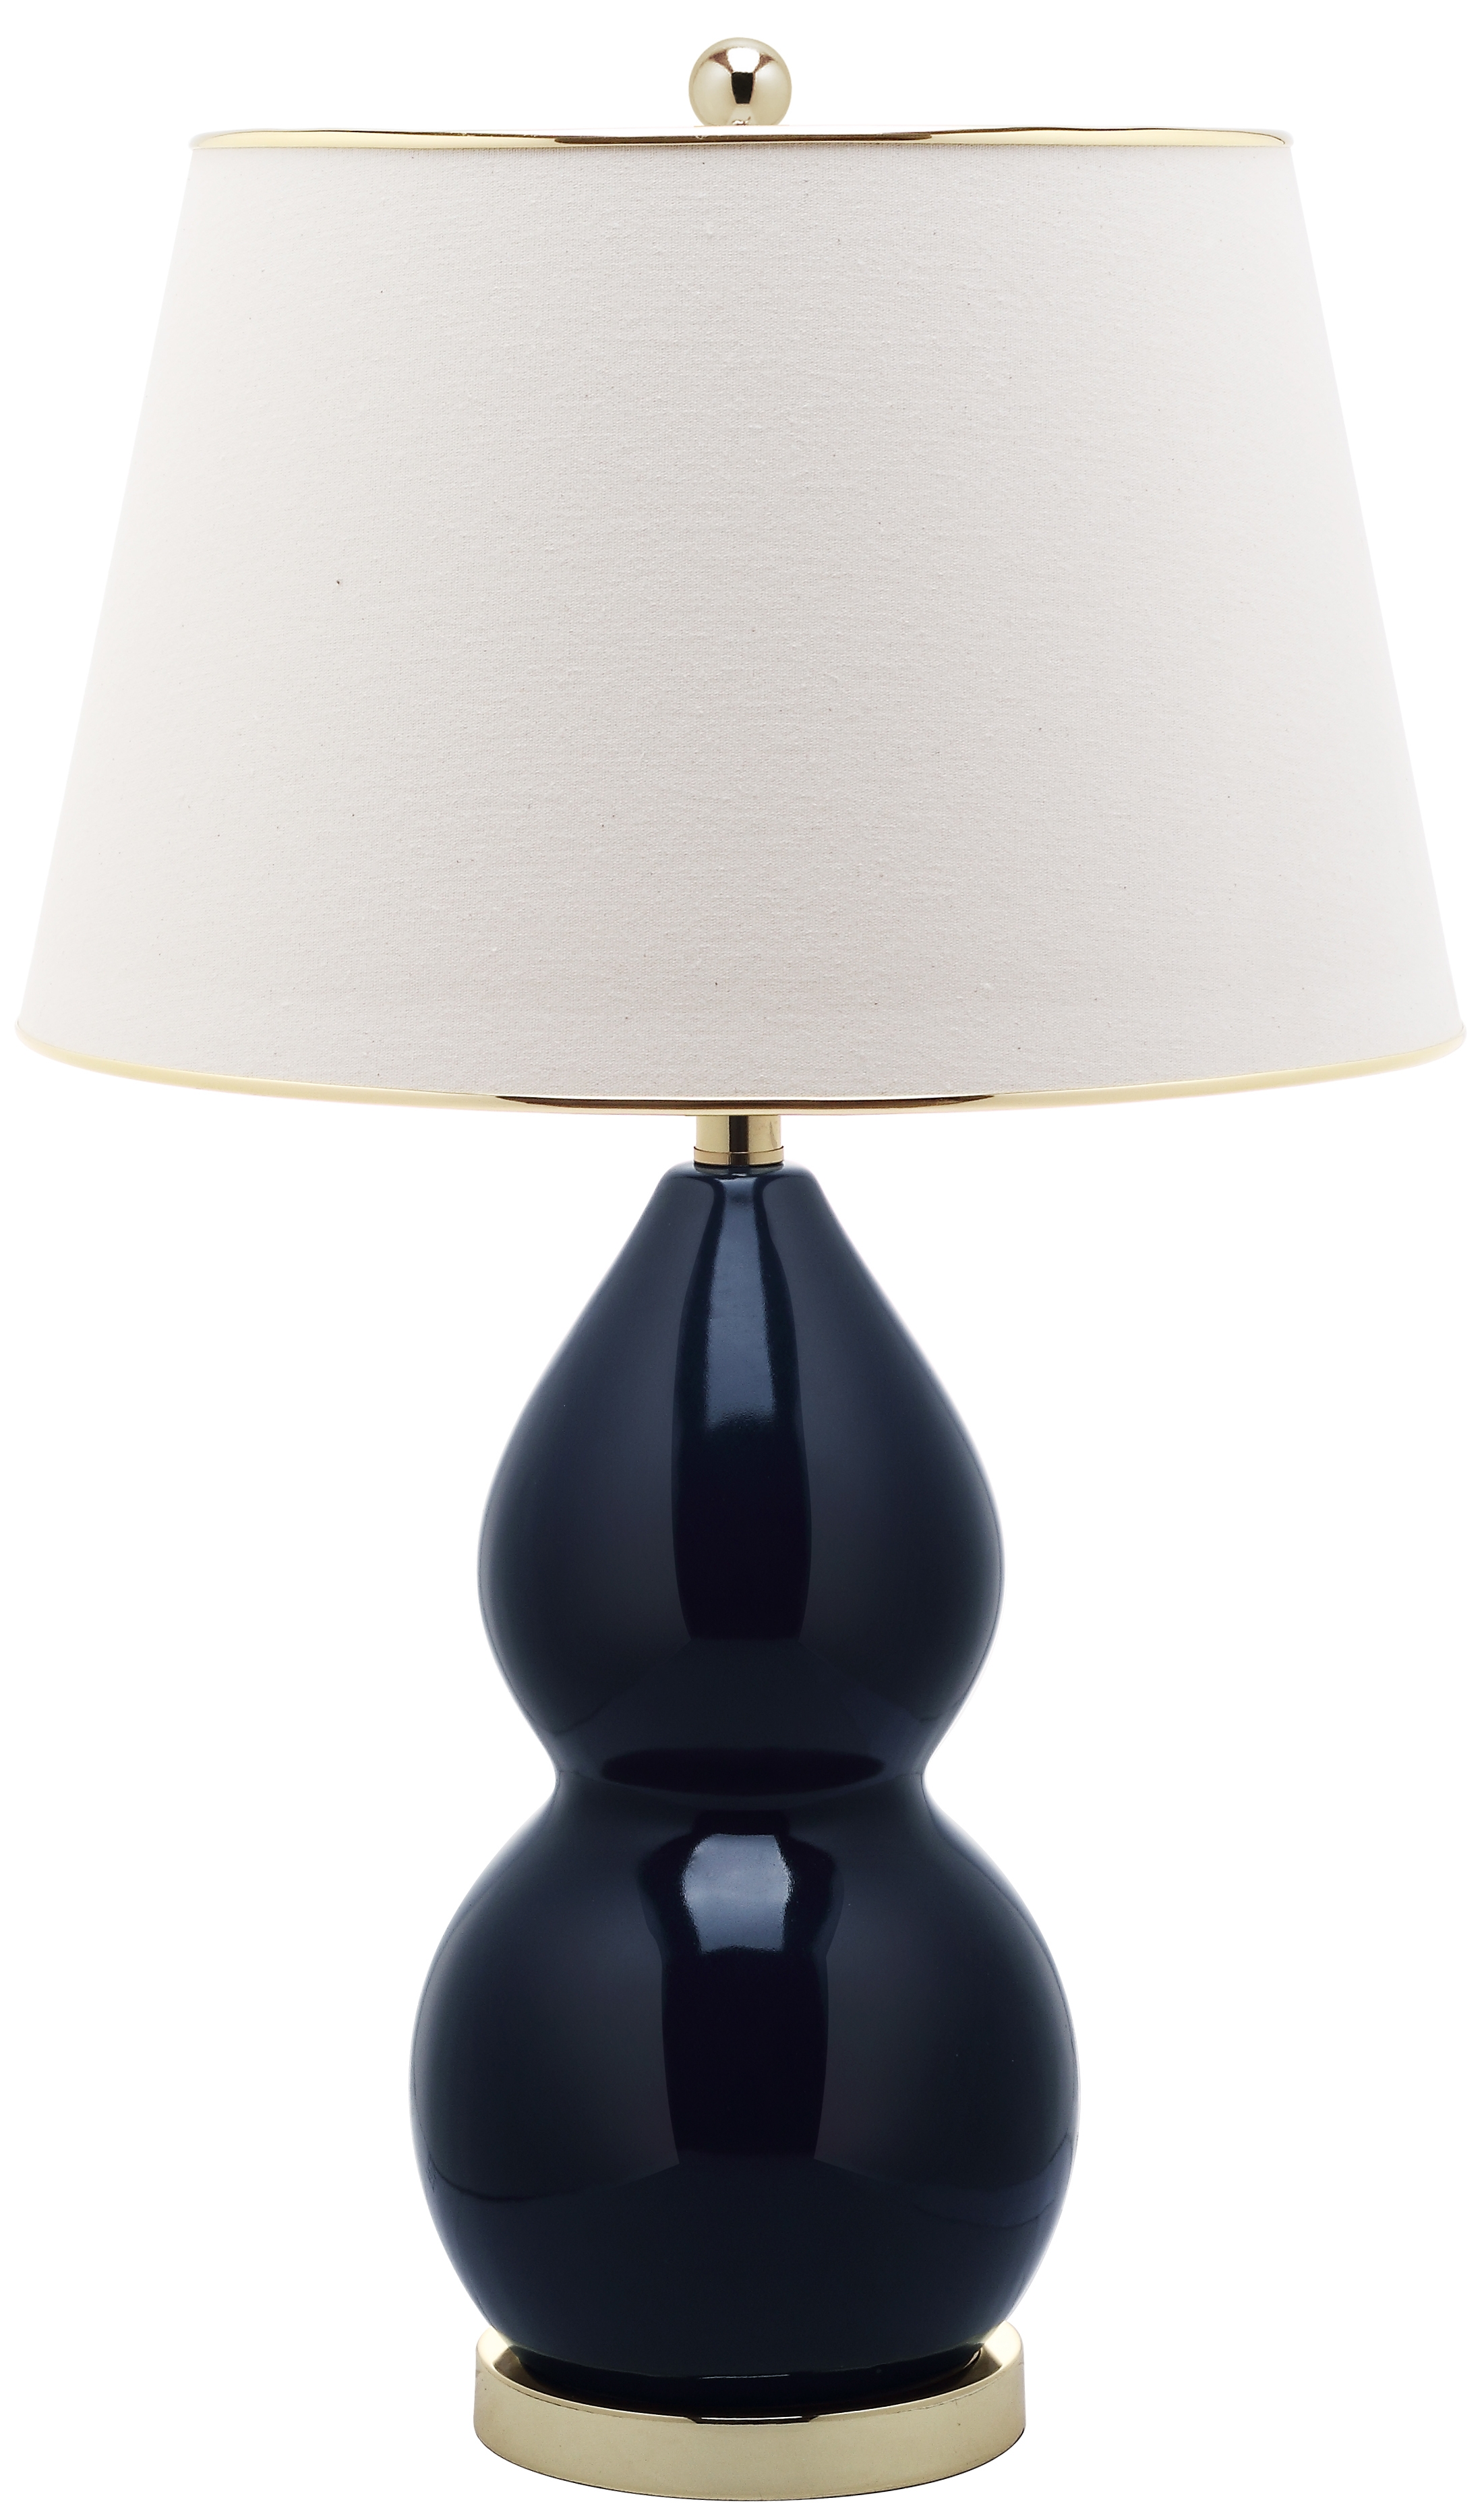 Jill 26.5-Inch H Double- Gourd Ceramic Table Lamp - Navy - Arlo Home - Image 3